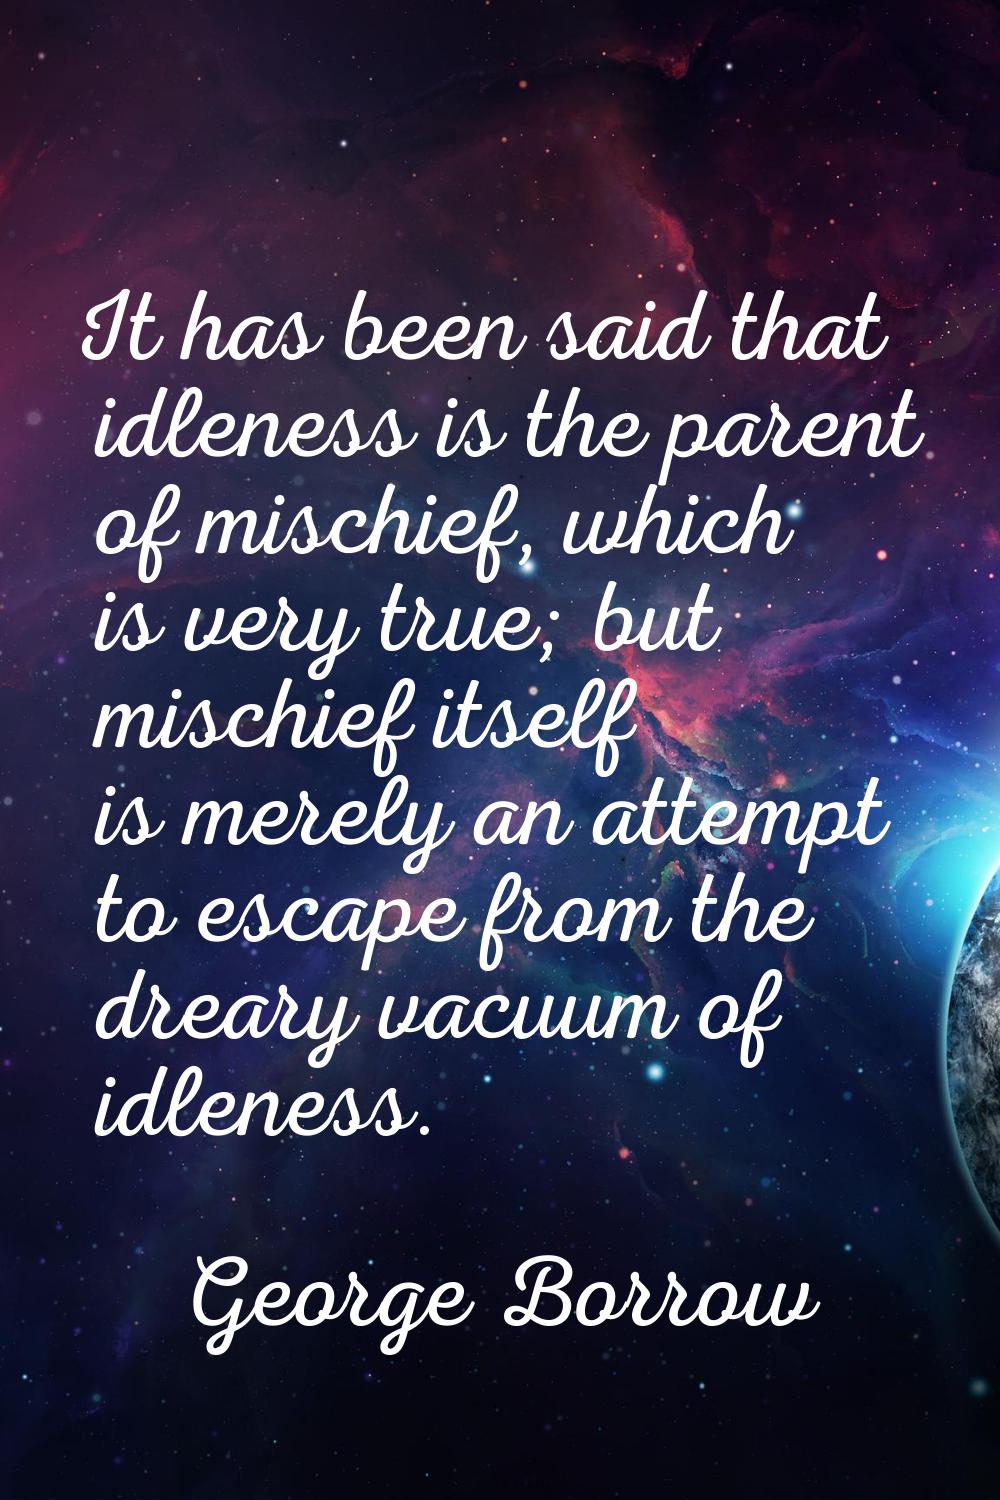 It has been said that idleness is the parent of mischief, which is very true; but mischief itself i